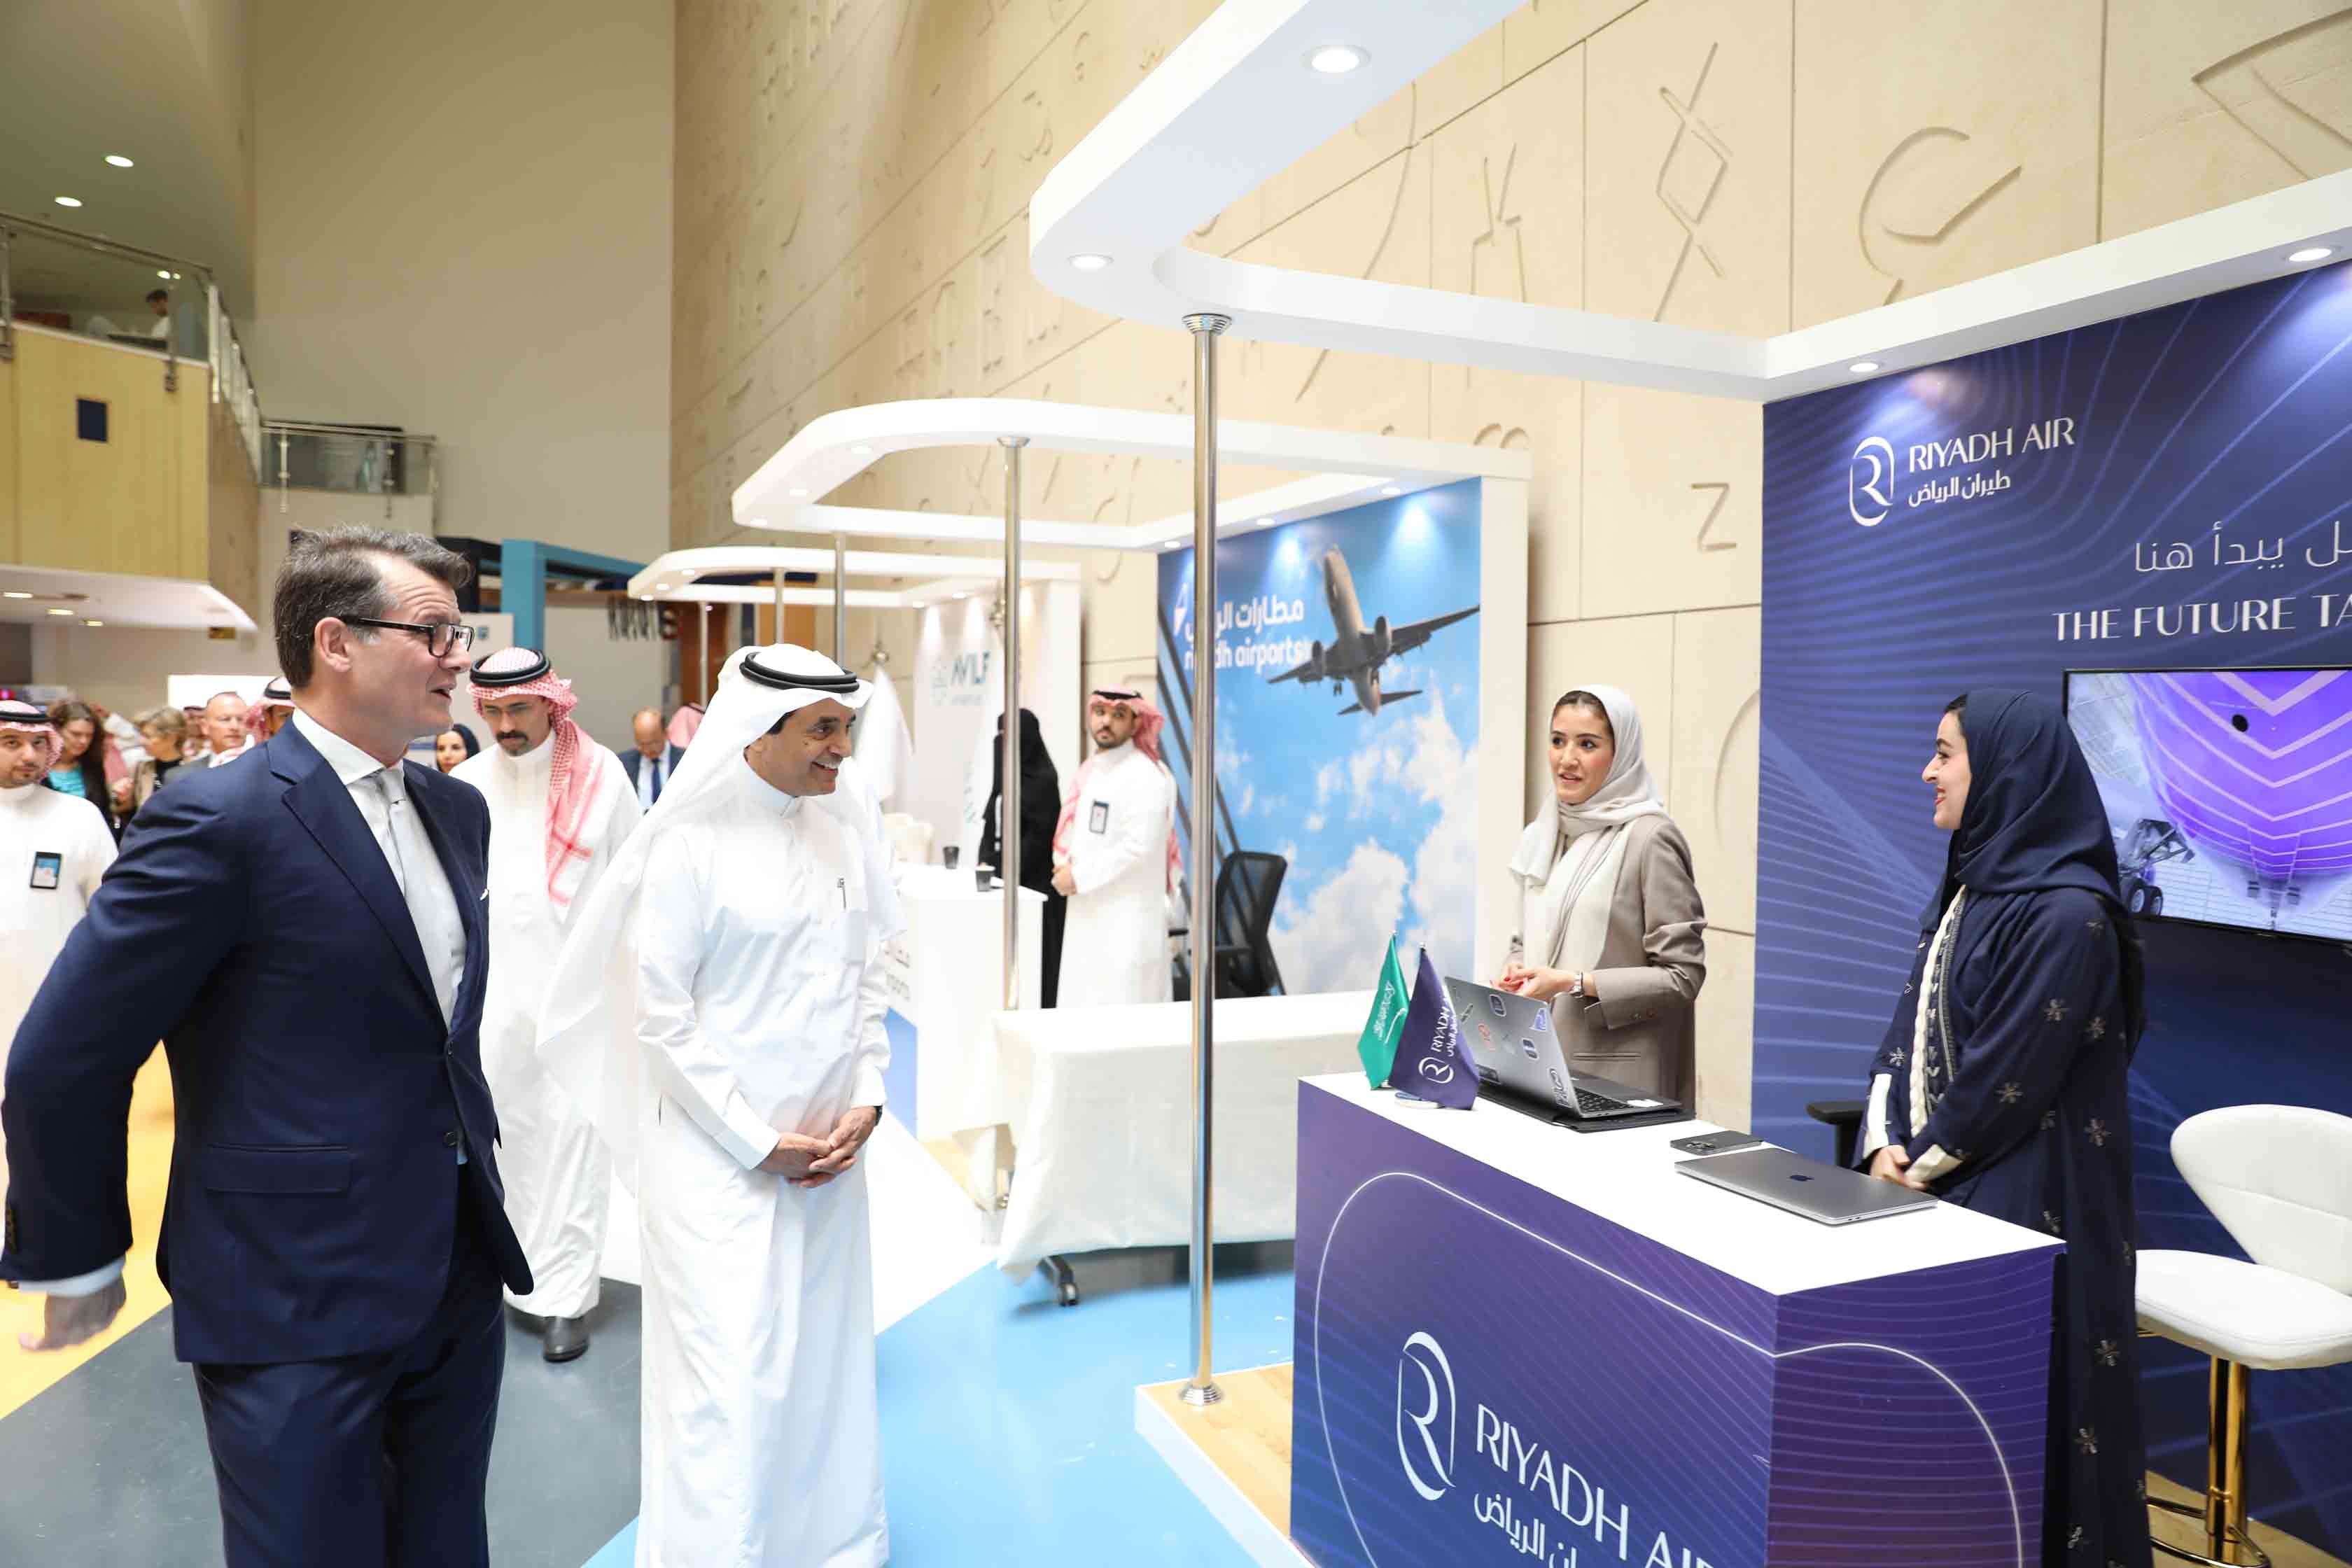 The College of Business Administration at the university holds an event (Aviation Academic Day)